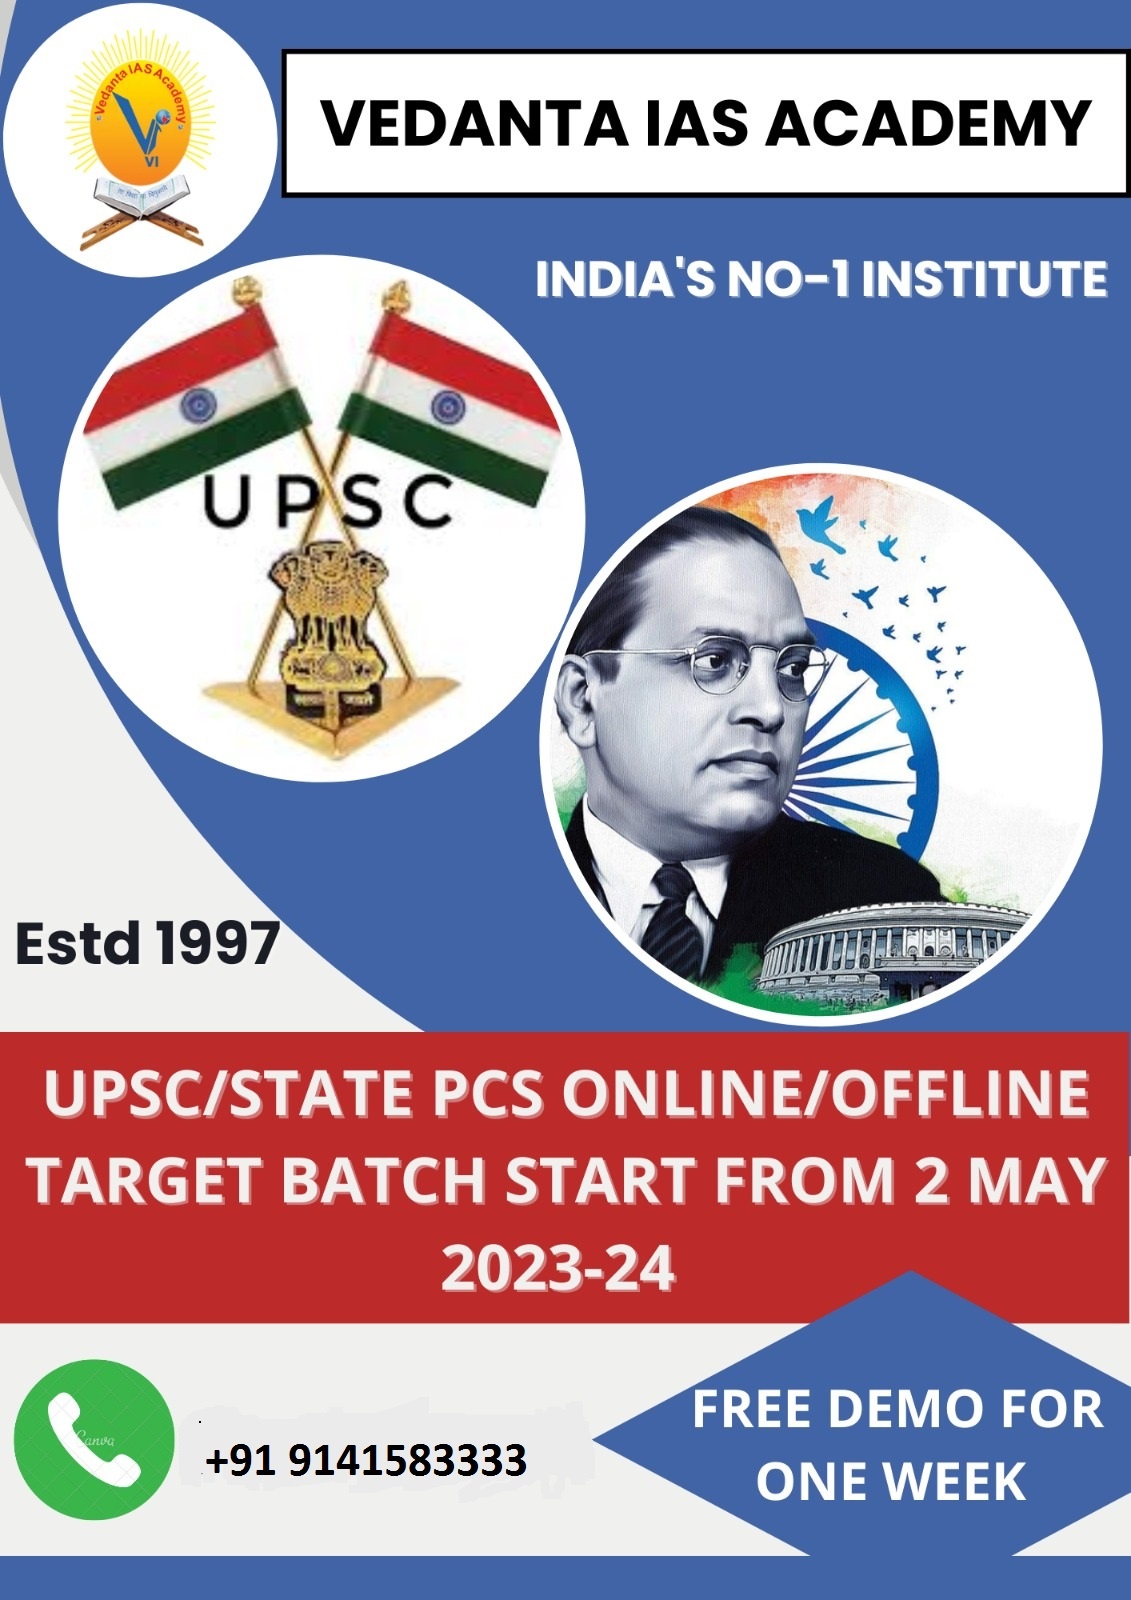 PSC/ UPSC, School tuition/ Subject classes, Exam coachings; Exp: More than 15 year